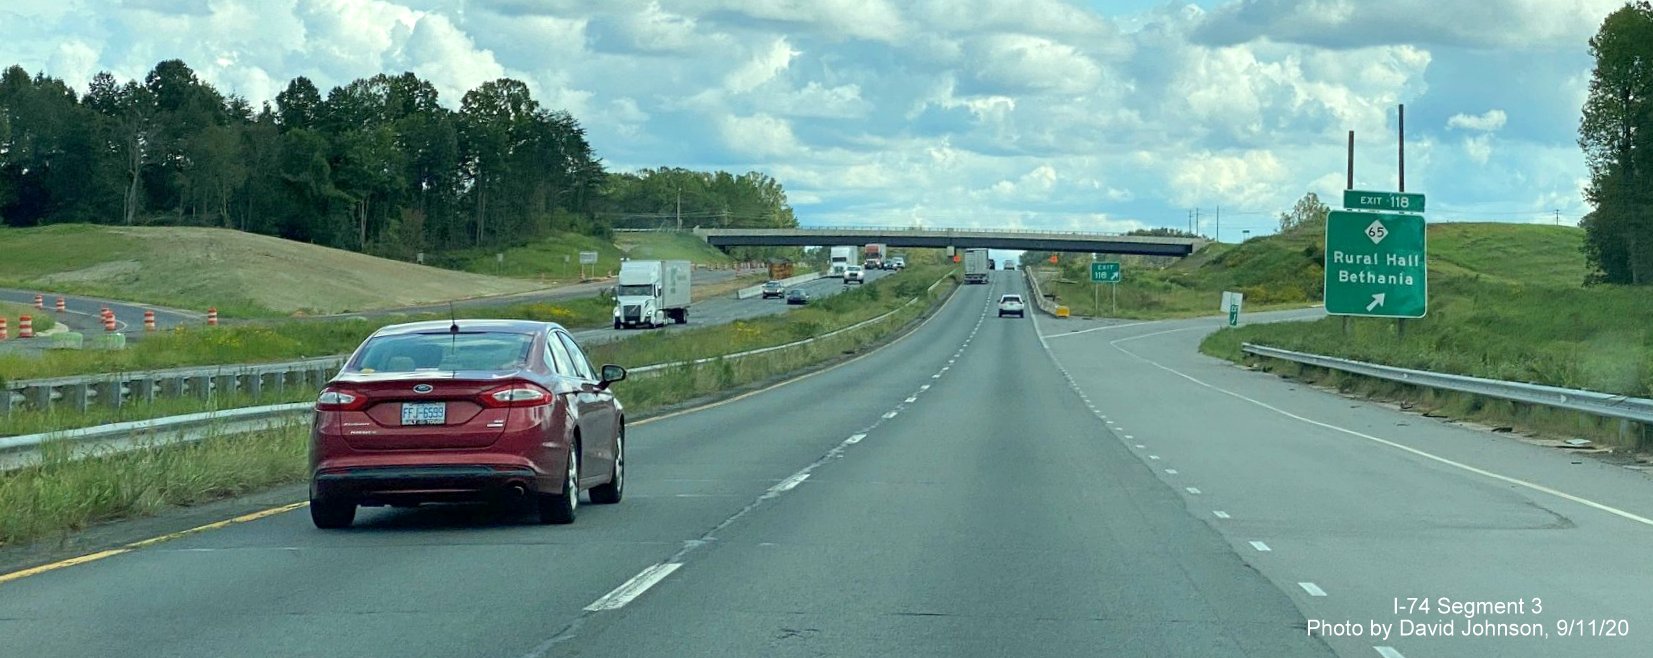 Image of widening along US 52 in advance of new ramp to NC 65 as part of future I-74 Winston Salem Northern Beltway interchange construction, by David Johnson September 2020